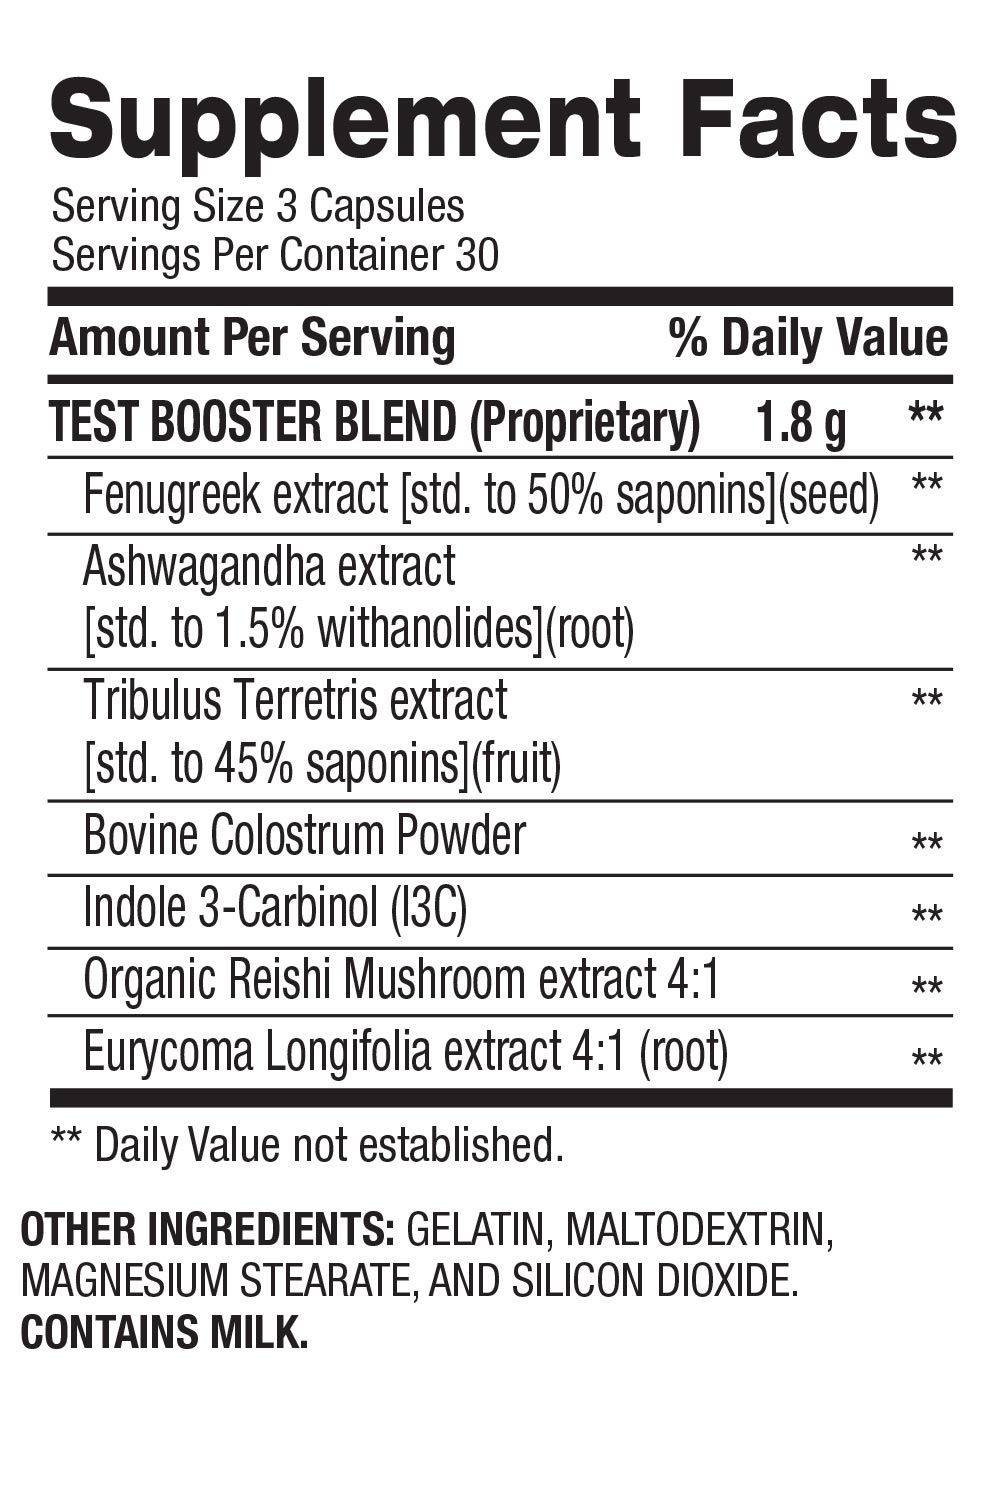 Ingredients List for Test Booster